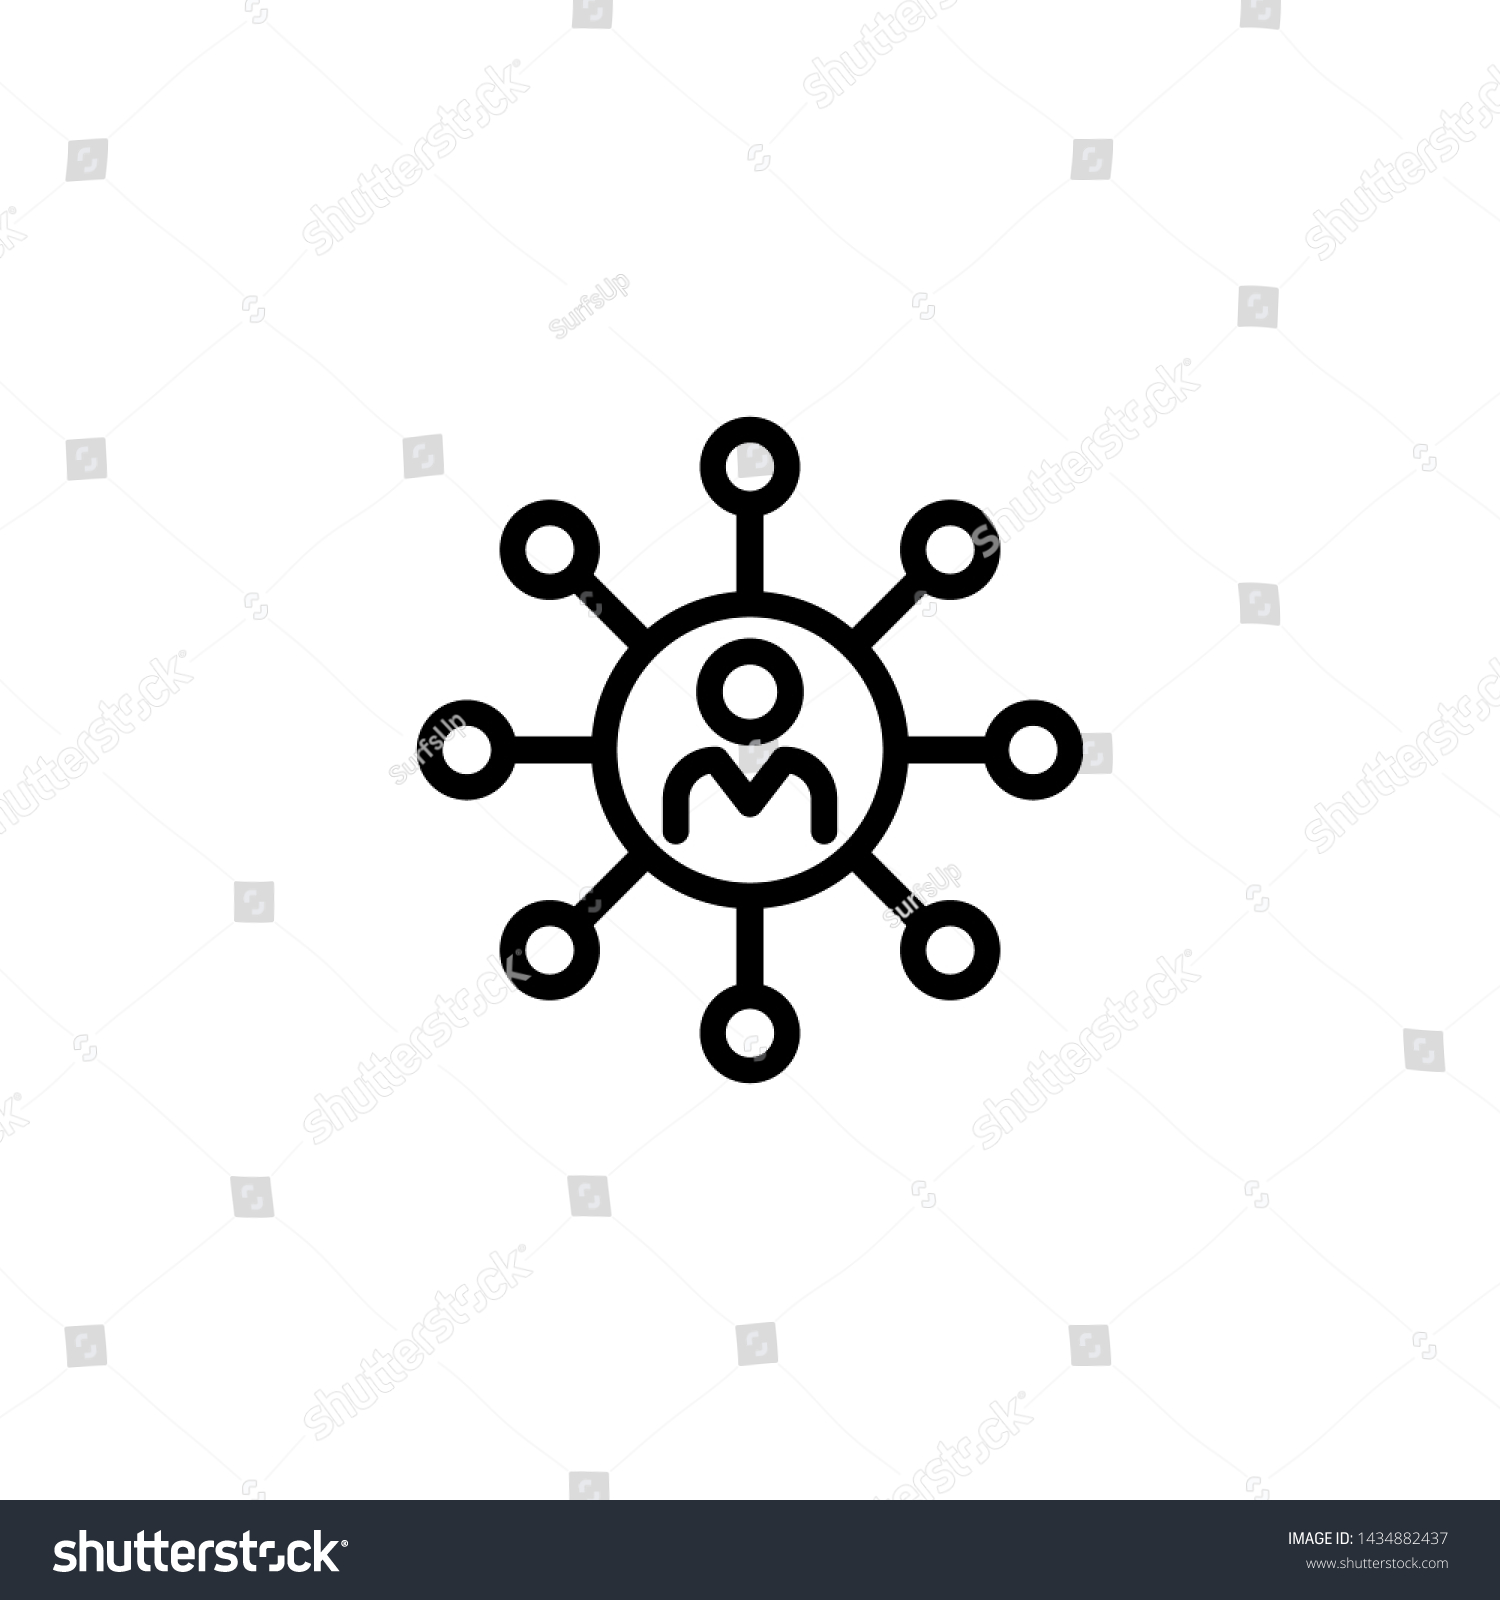 Abilities line icon. Person in circle, core, network. Skills concept. Vector illustration can be used for topics like competencies, multitasking, leadership #1434882437